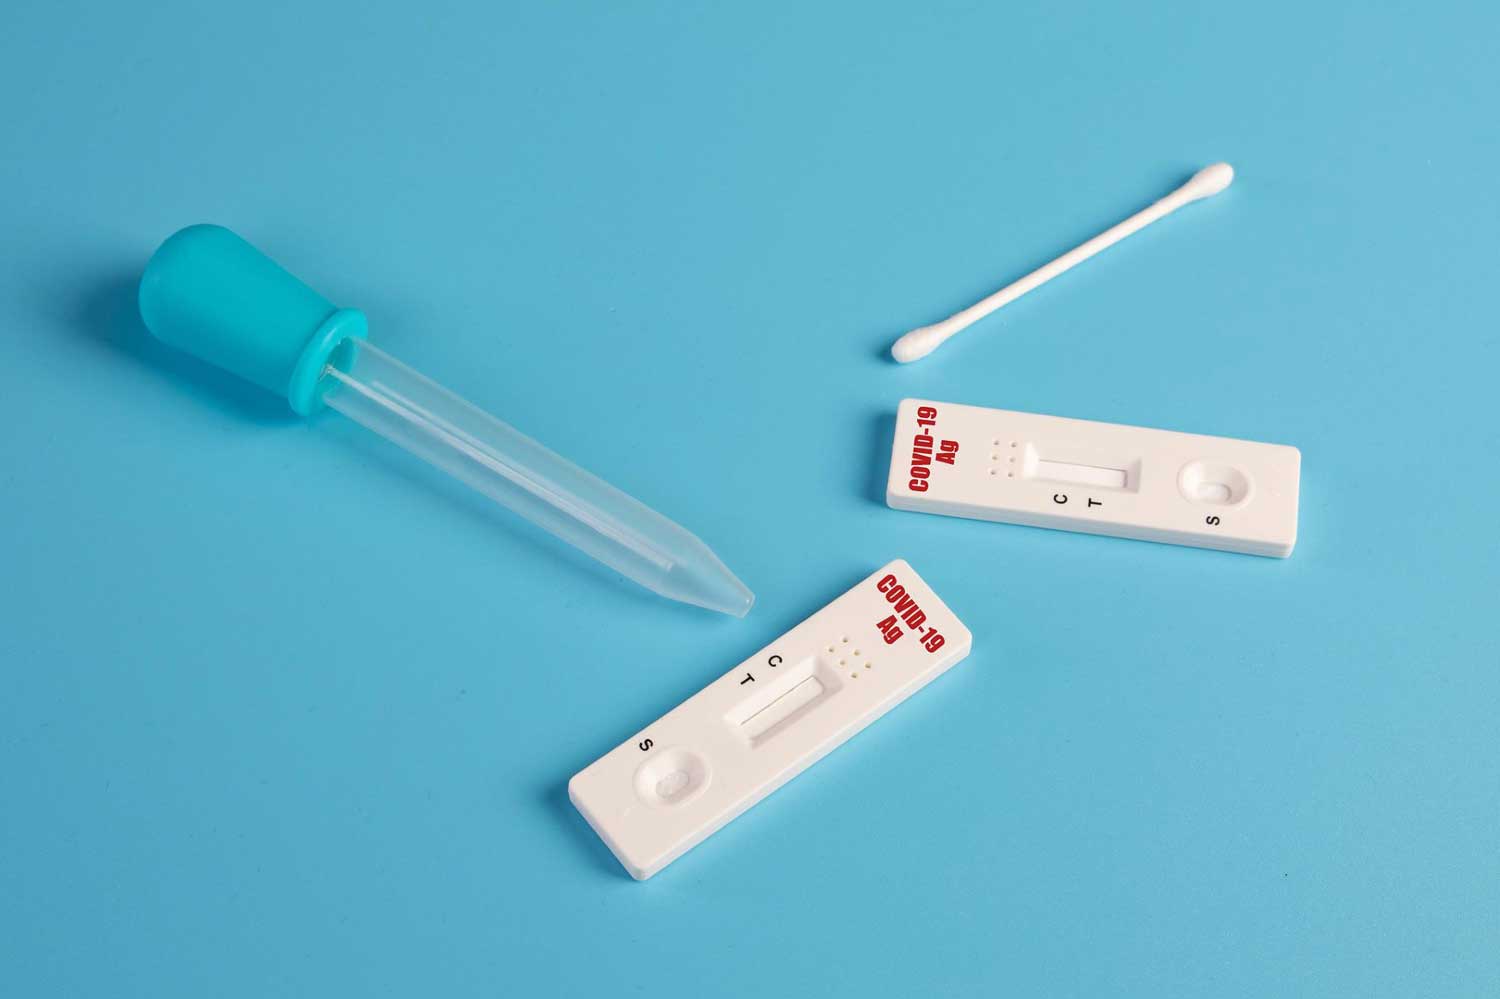 COVID-19 Rapid Antigen Tests: What They Are & Where To Get Them